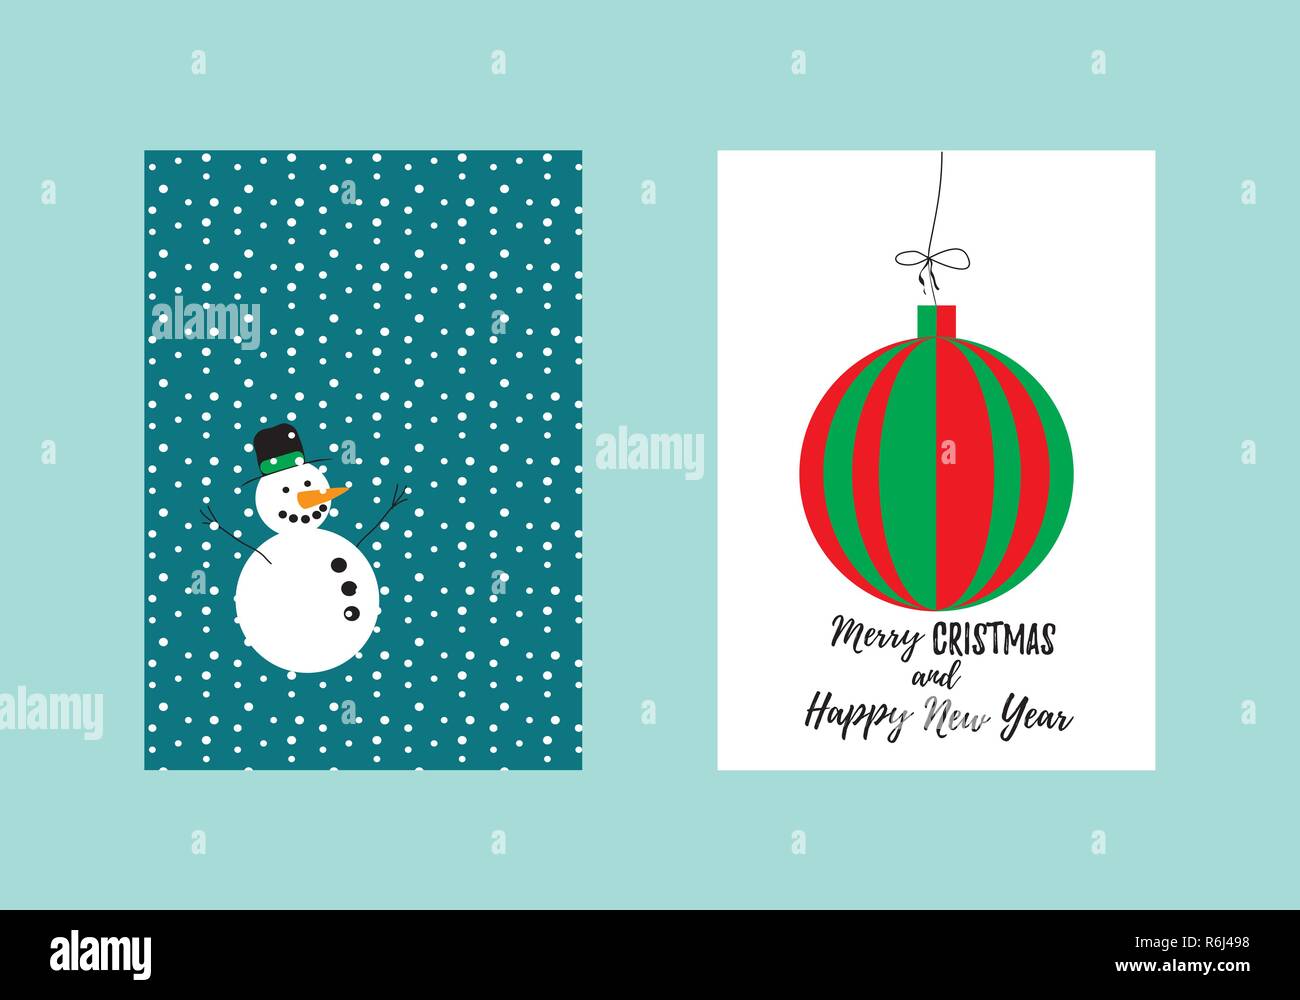 Merry Christmas and Happy New Year vector card Stock Vector